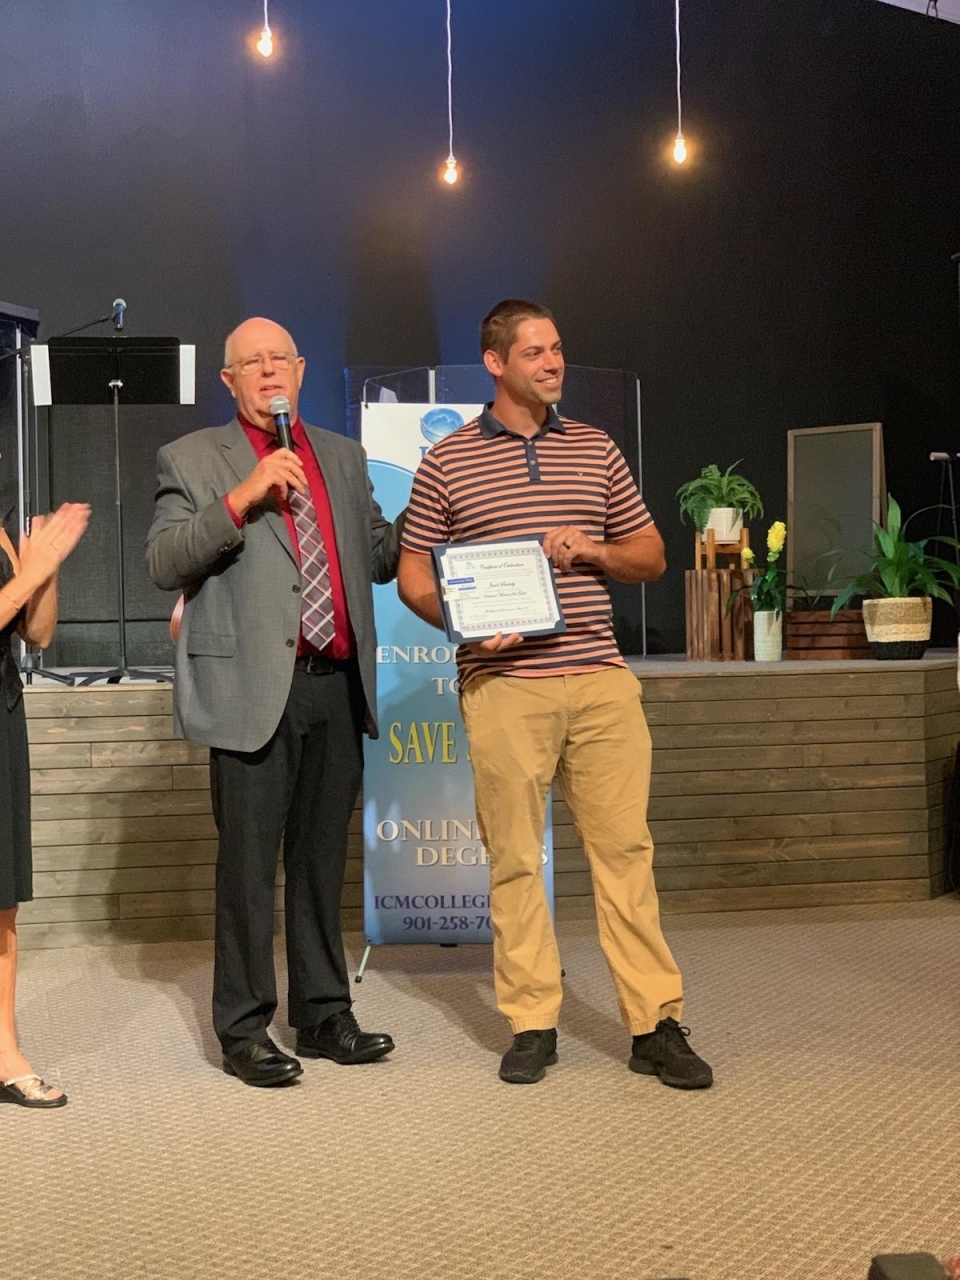 It was an honor and a privilege to licensed and ordained Jake Snavely last Sunday at Freedom Fellowship Church in Orlando.  Jake worked very hard thru the International College of ministry license and ordination program . We licensed and ordained Jake as a minister of the Gospel of Jesus Christ. I know that Jake will be a very worthy representative of our savior.  Congratulations to Jake!